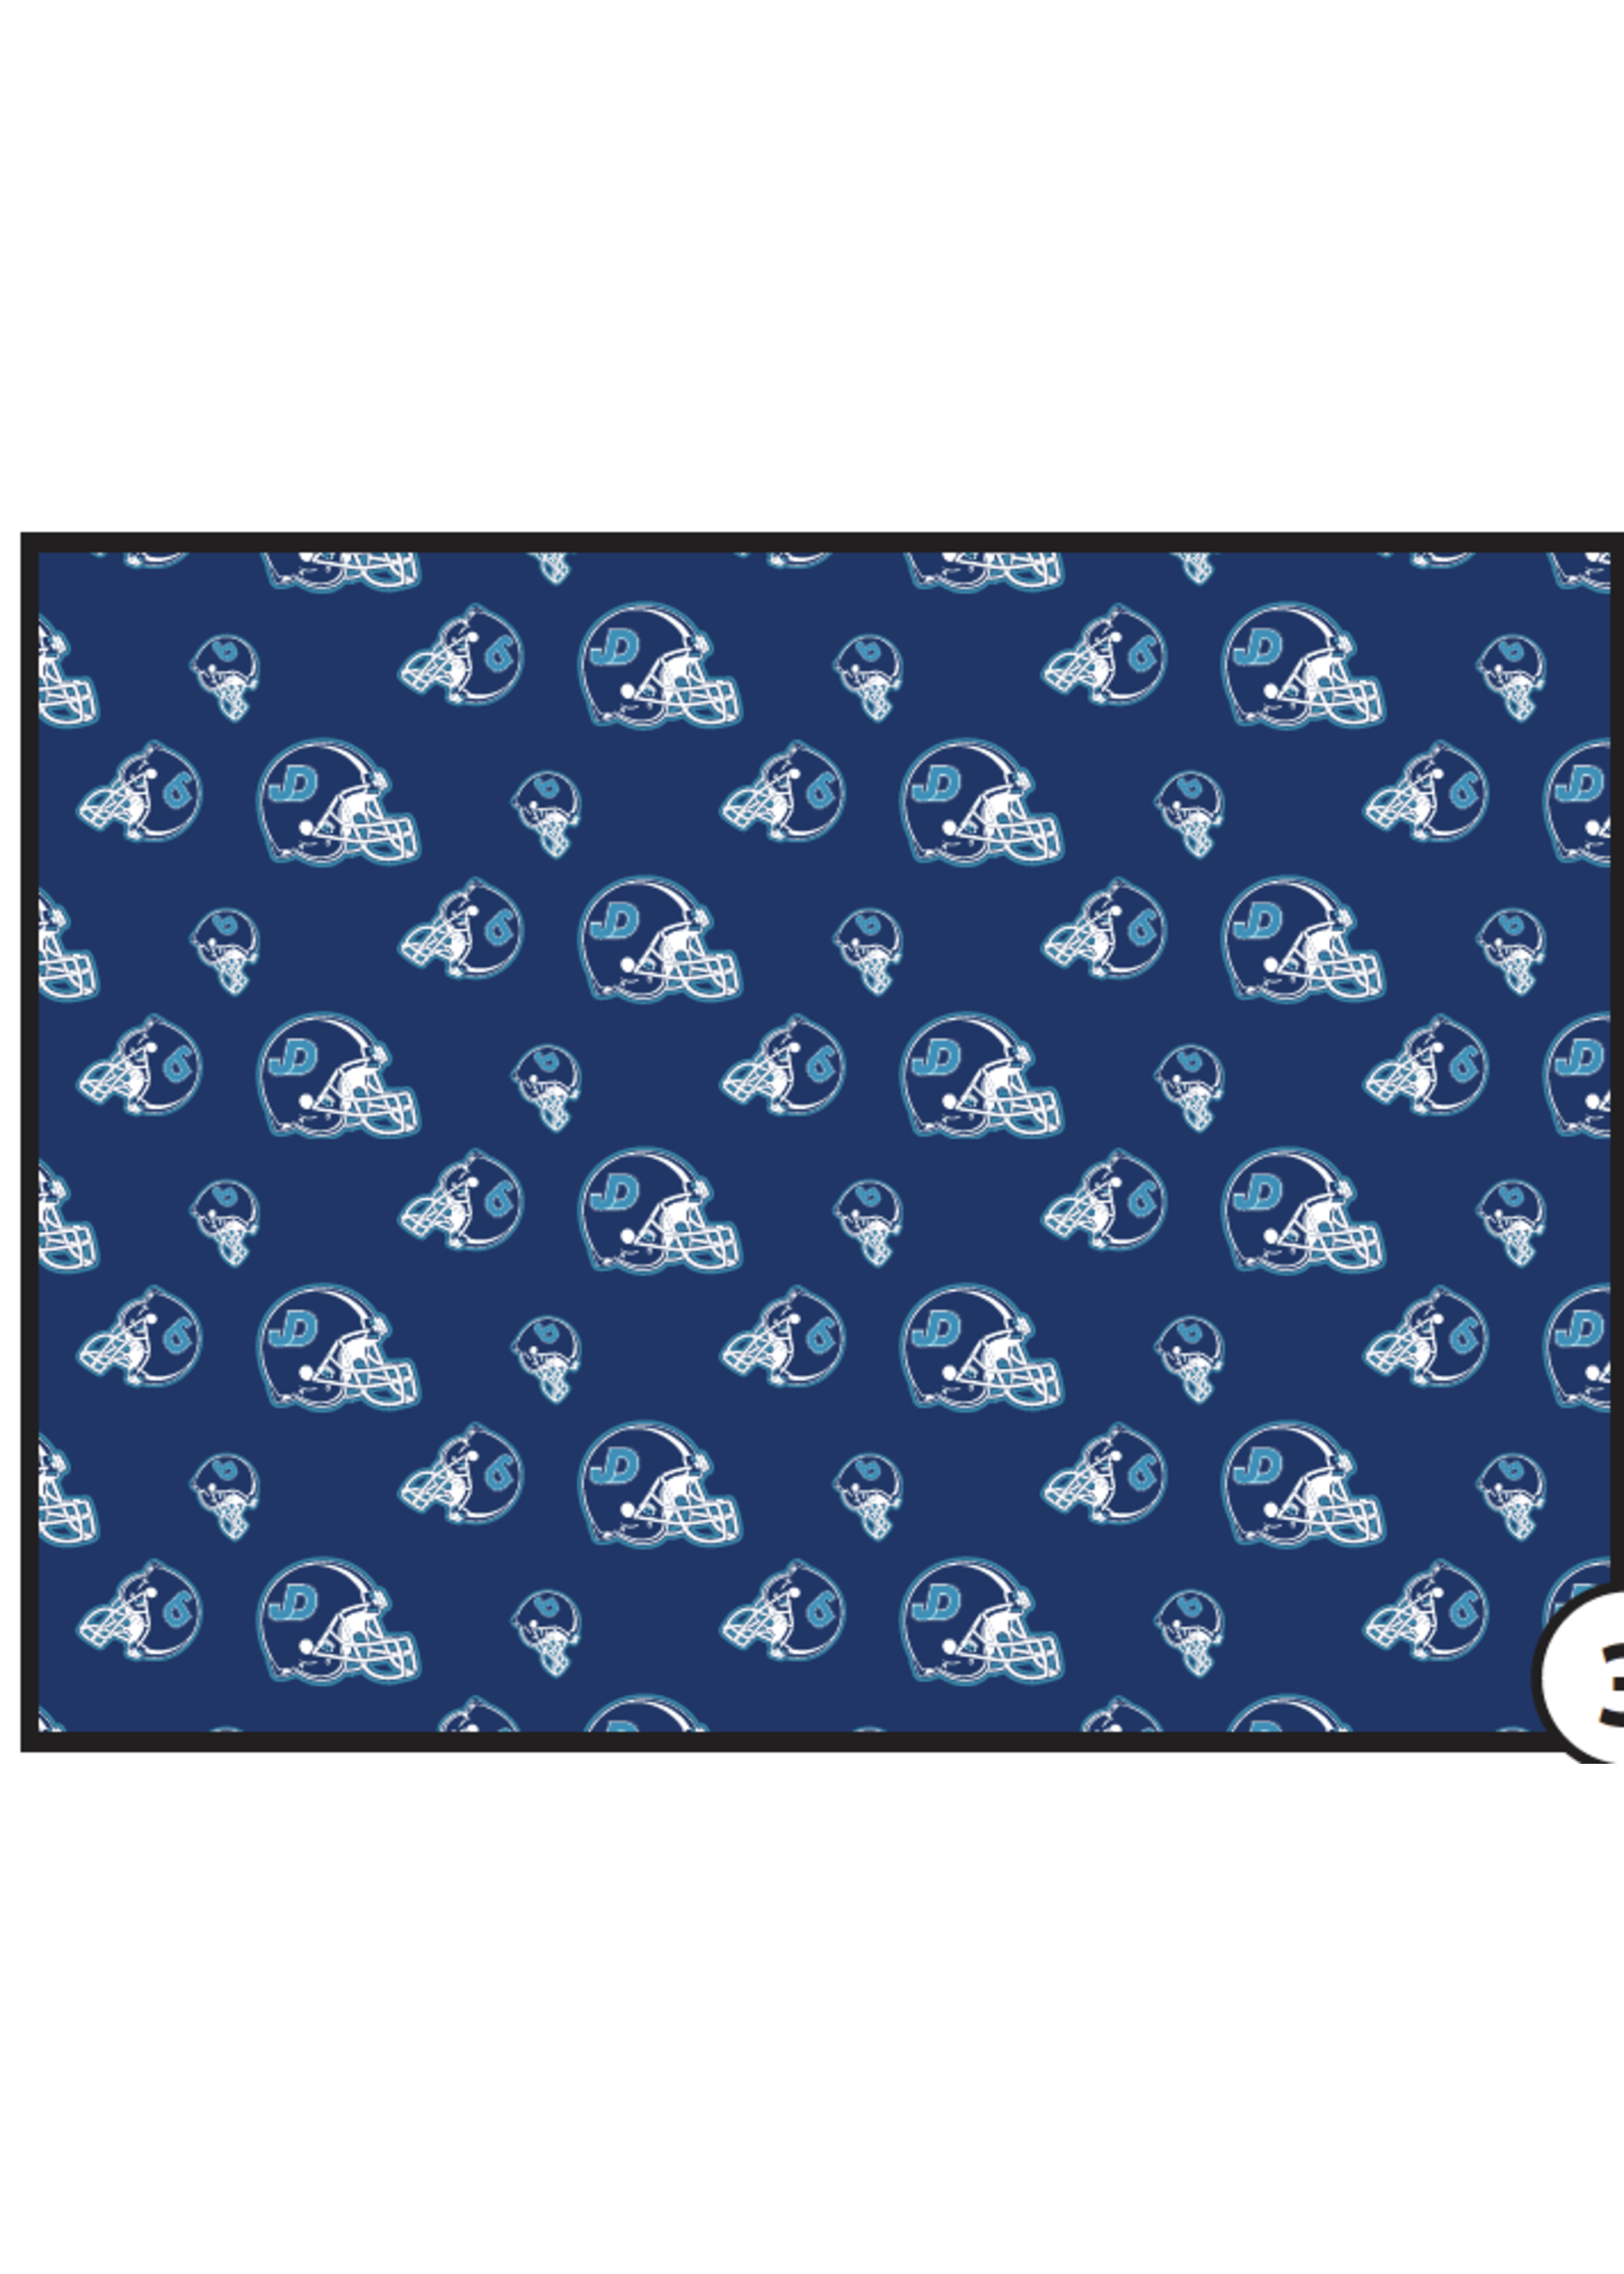 NON-UNIFORM JD D-Luxe Plush Spirit Wrap Blanket, Football - NEW!! - This item is on order and arriving soon!